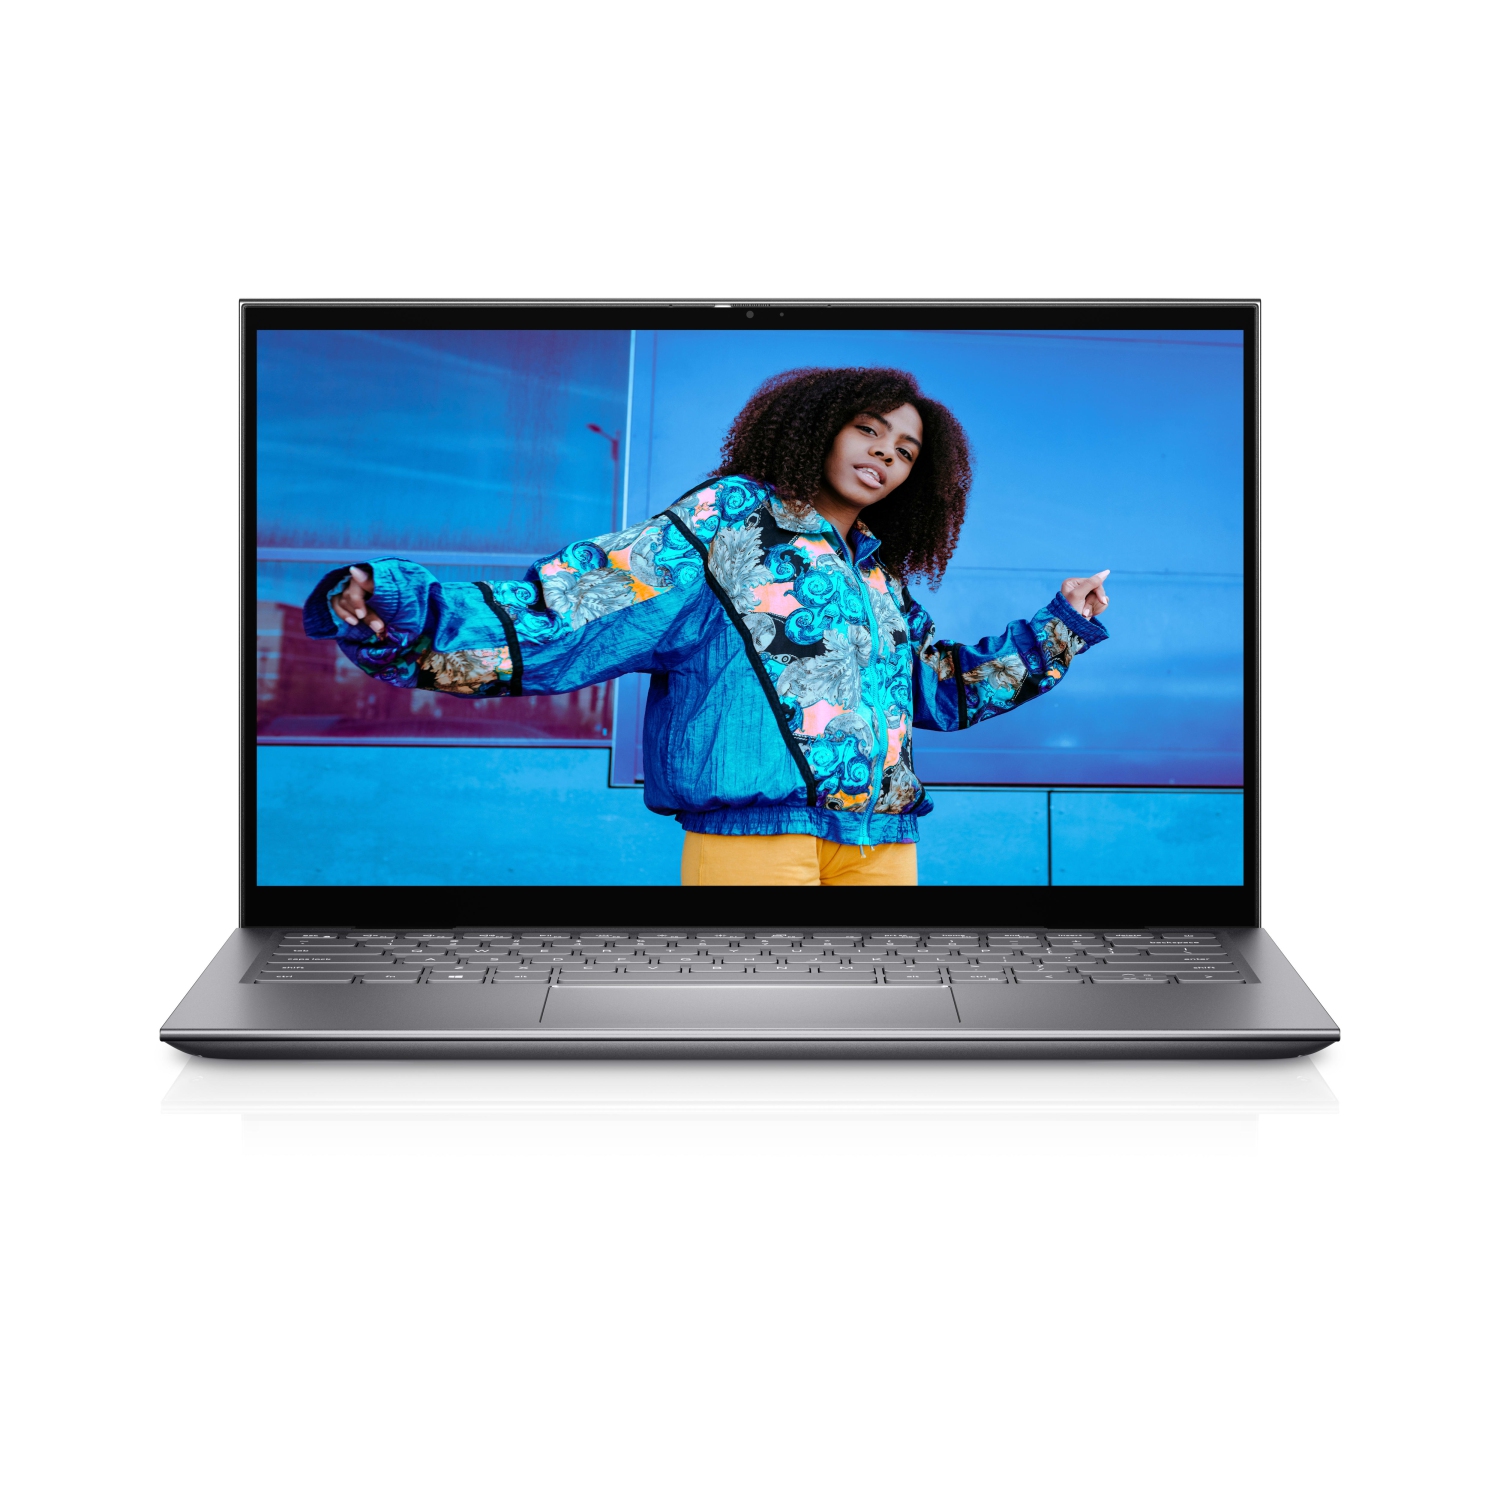 Refurbished (Excellent) – Dell Inspiron 5410 2-in-1 (2021) | 14" FHD Touch | Core i7 - 512GB SSD - 12GB RAM | 4 Cores @ 5 GHz - 11th Gen CPU